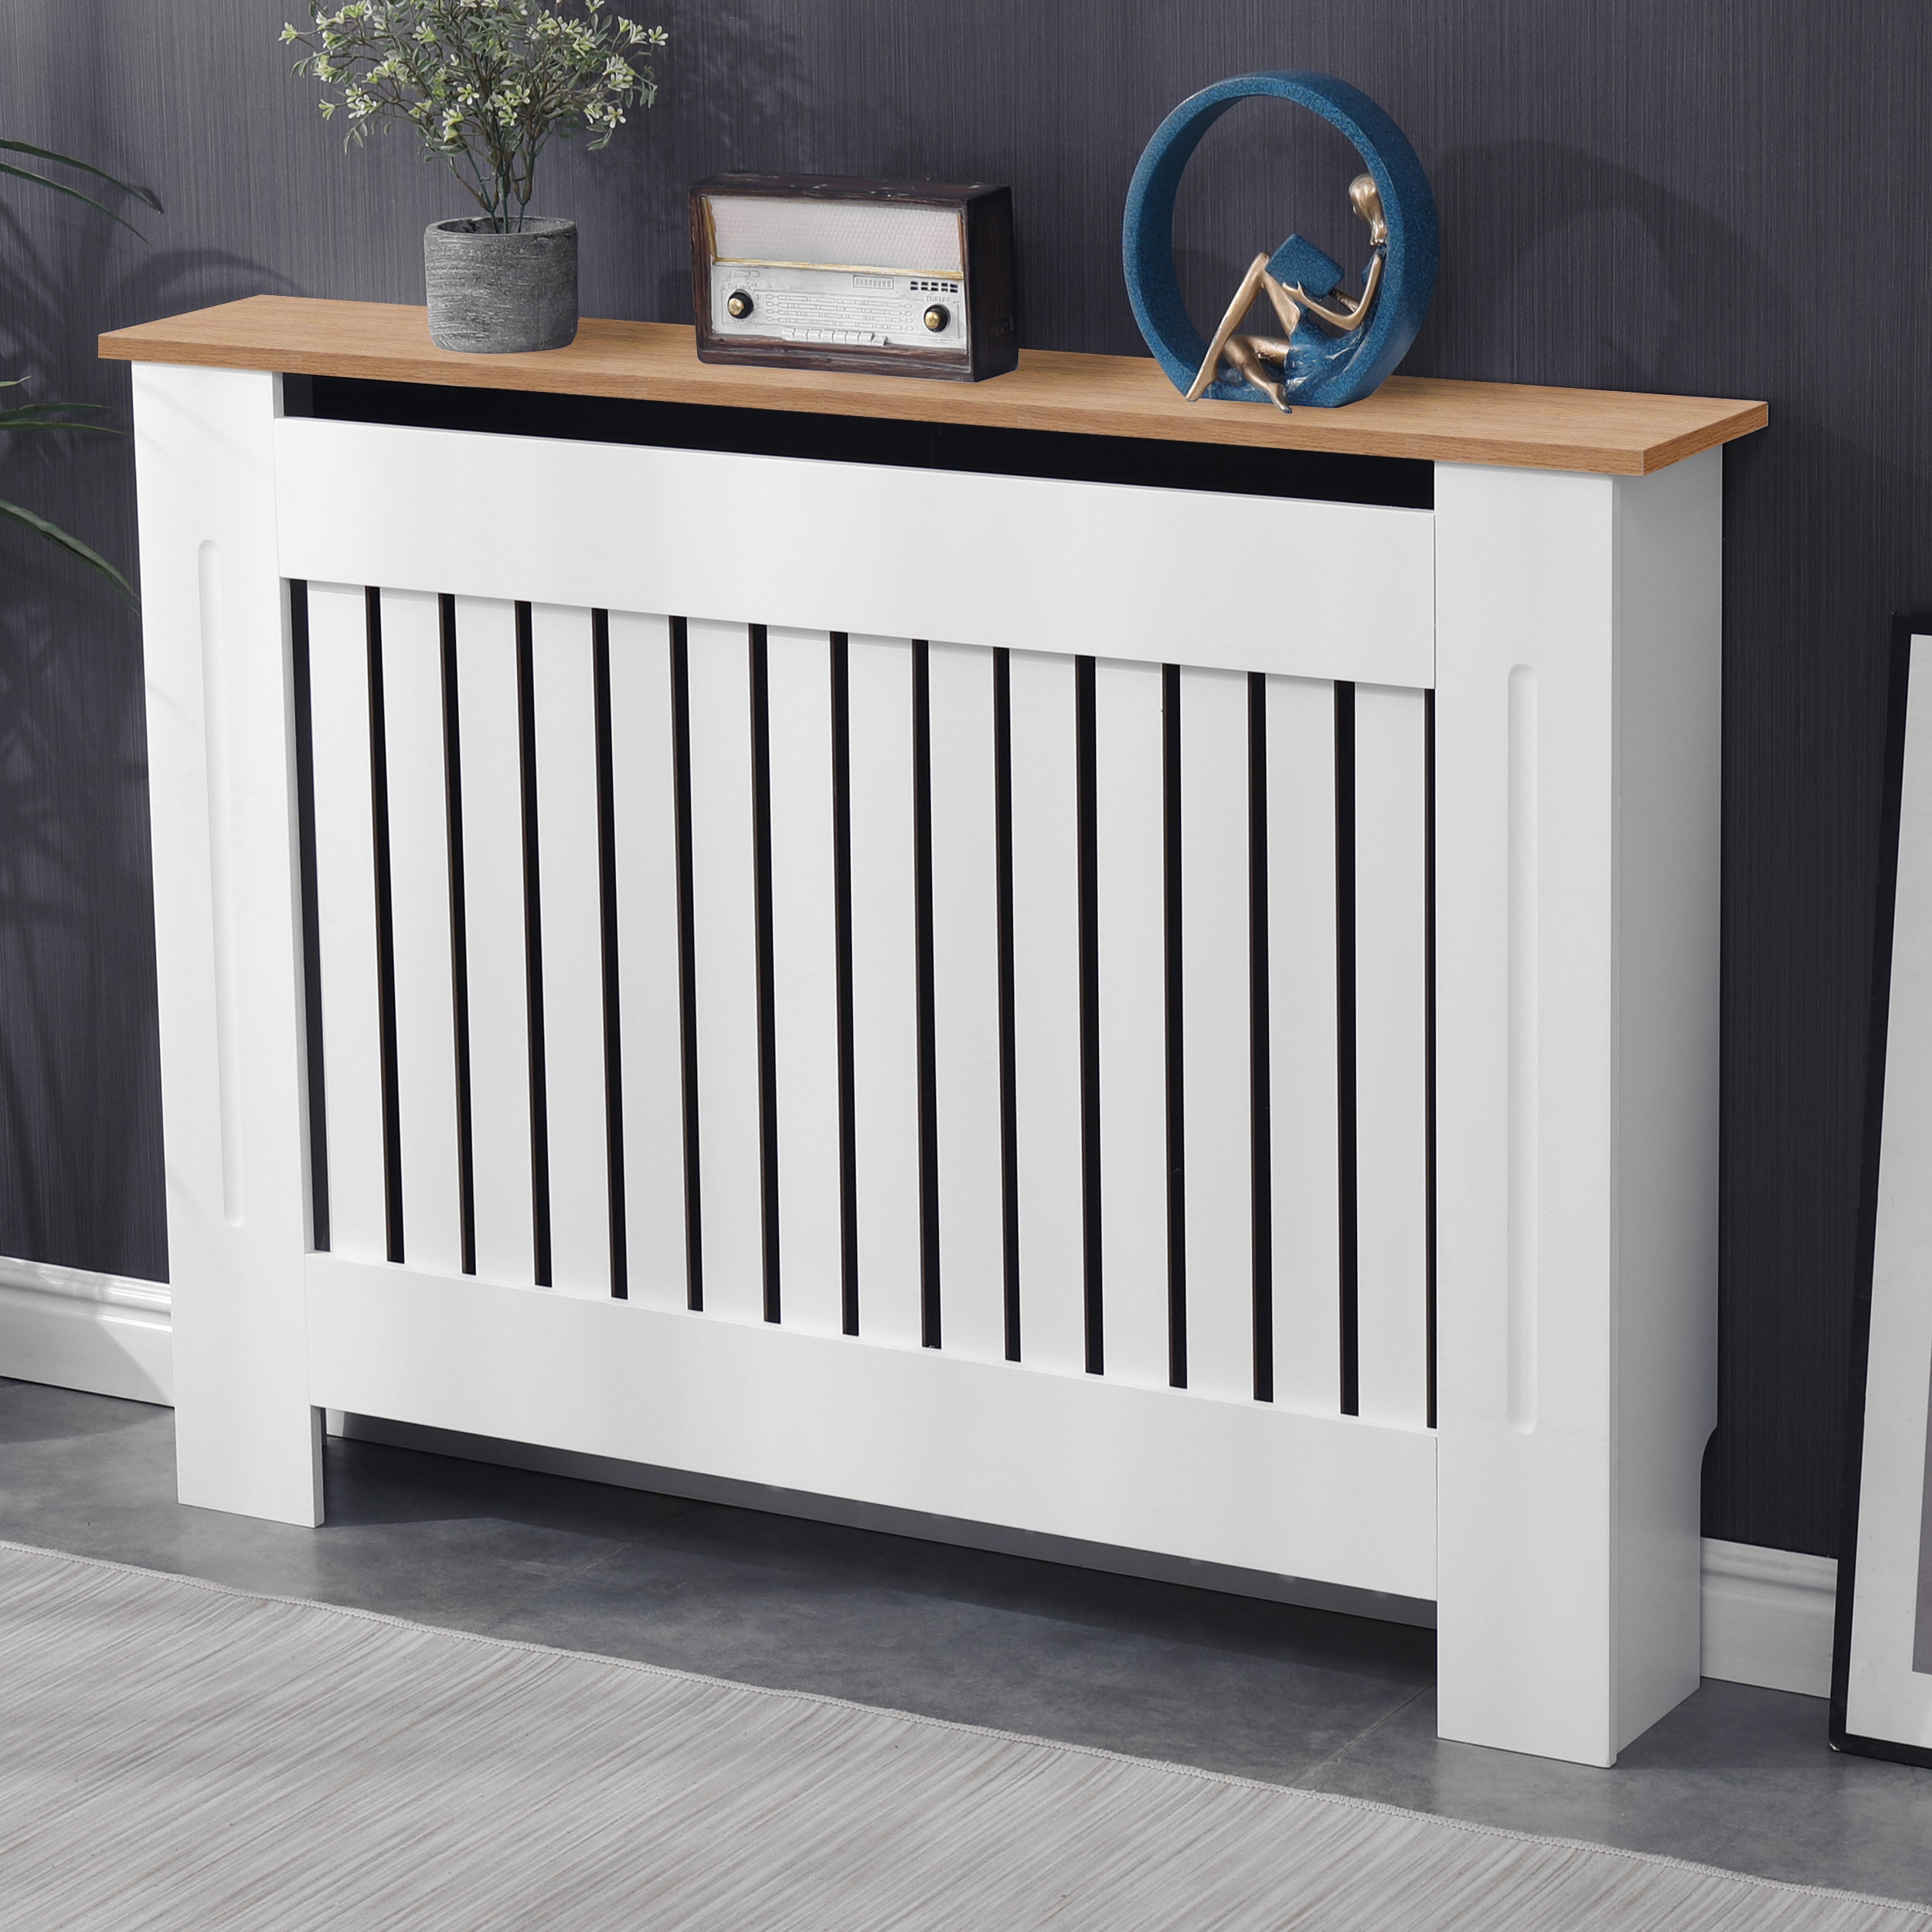 wooden radiator covers